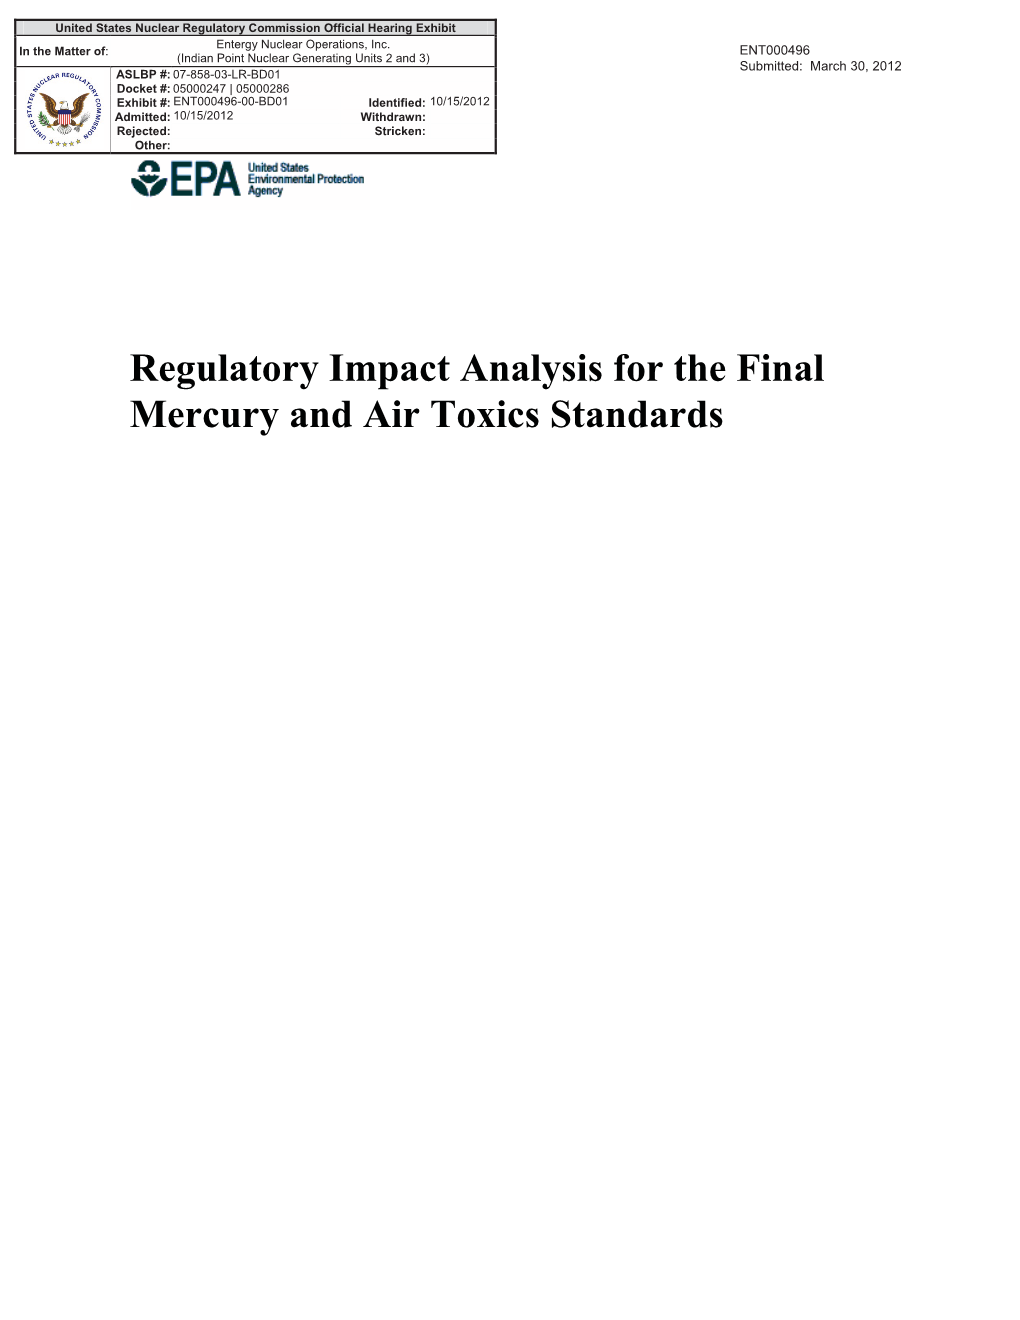 EPA, Regulatory Impact Analysis for the Final Mercury and Air Toxics Standards 0391, Exce